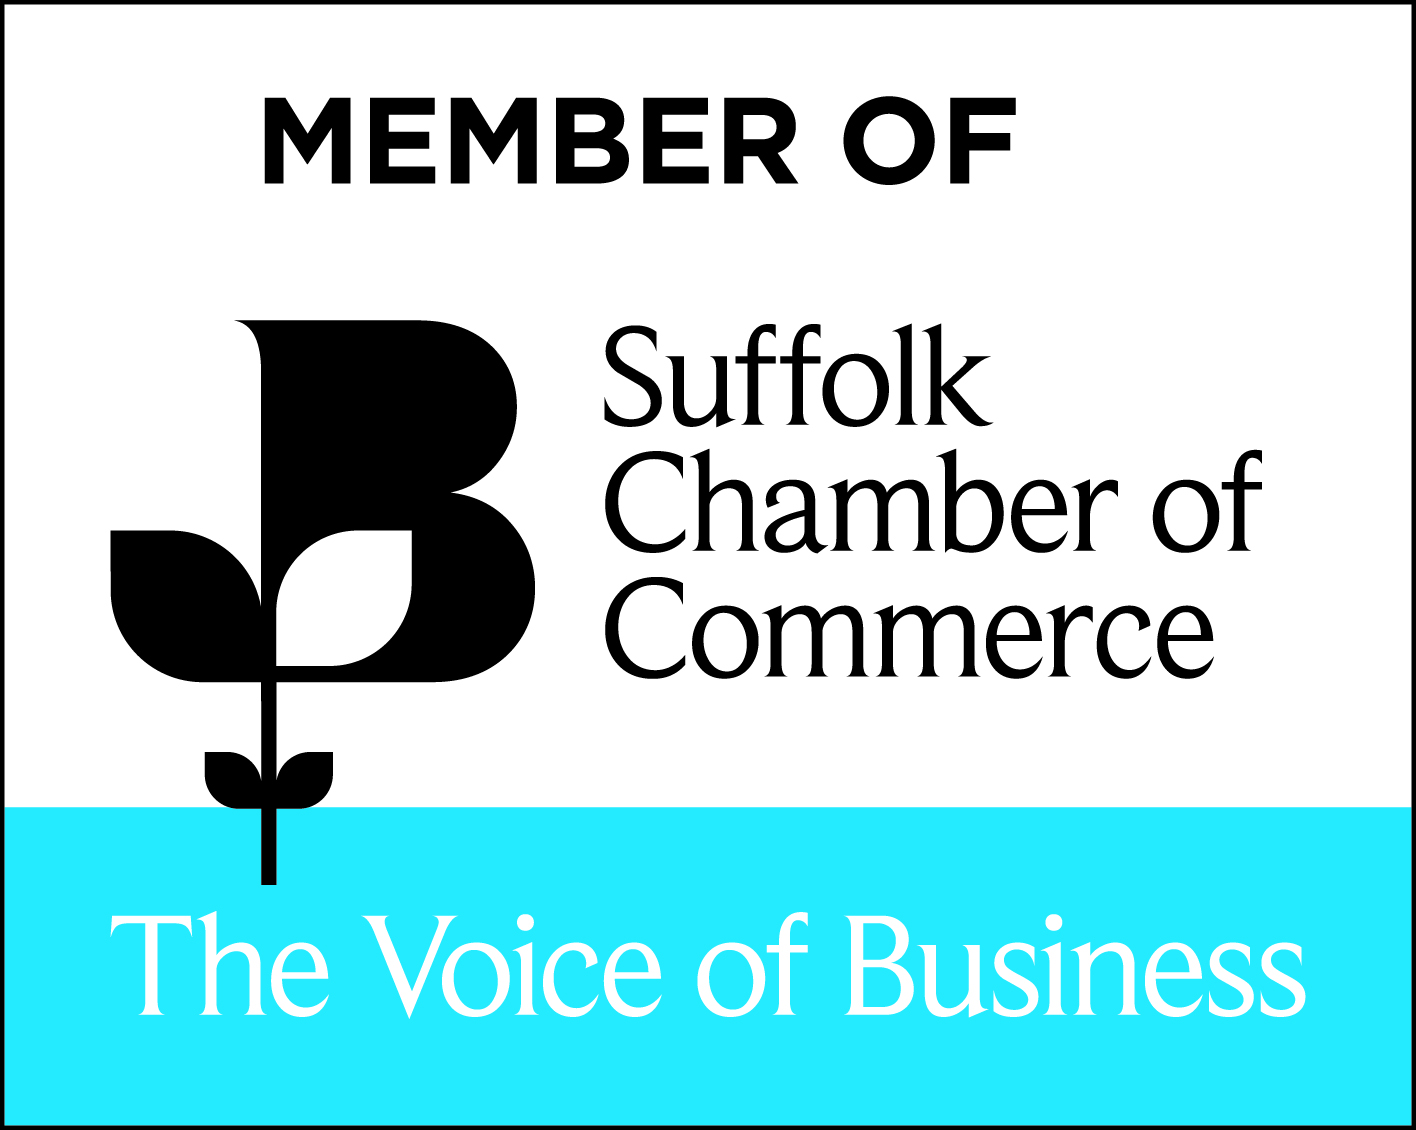 Member of the Suffolk Chamber or Commerce